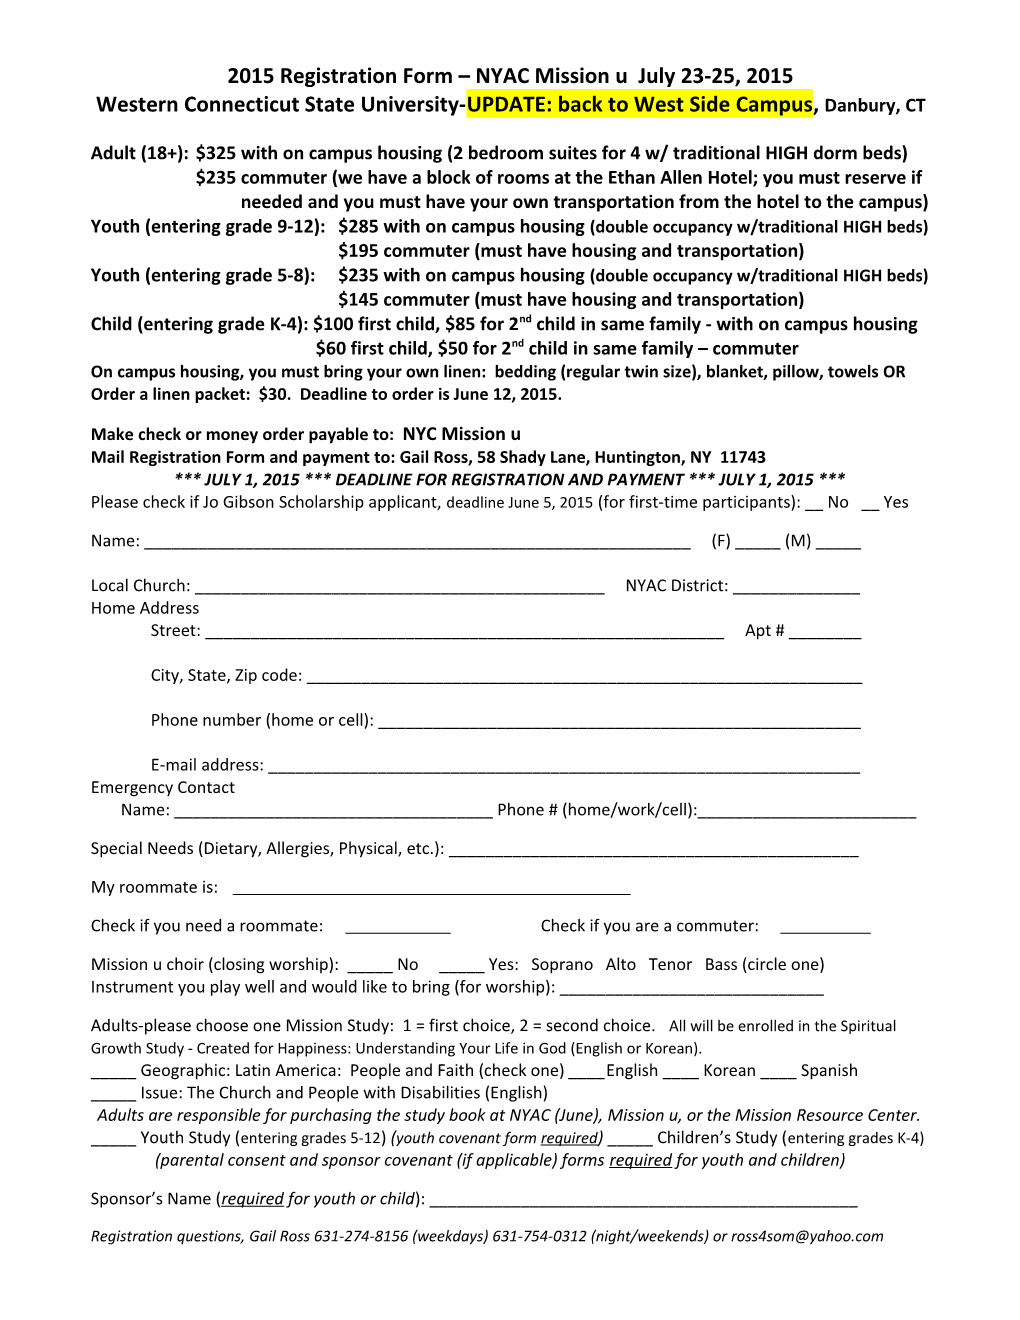 Registration Form 2008, - PLEASE PRINT, Clearly